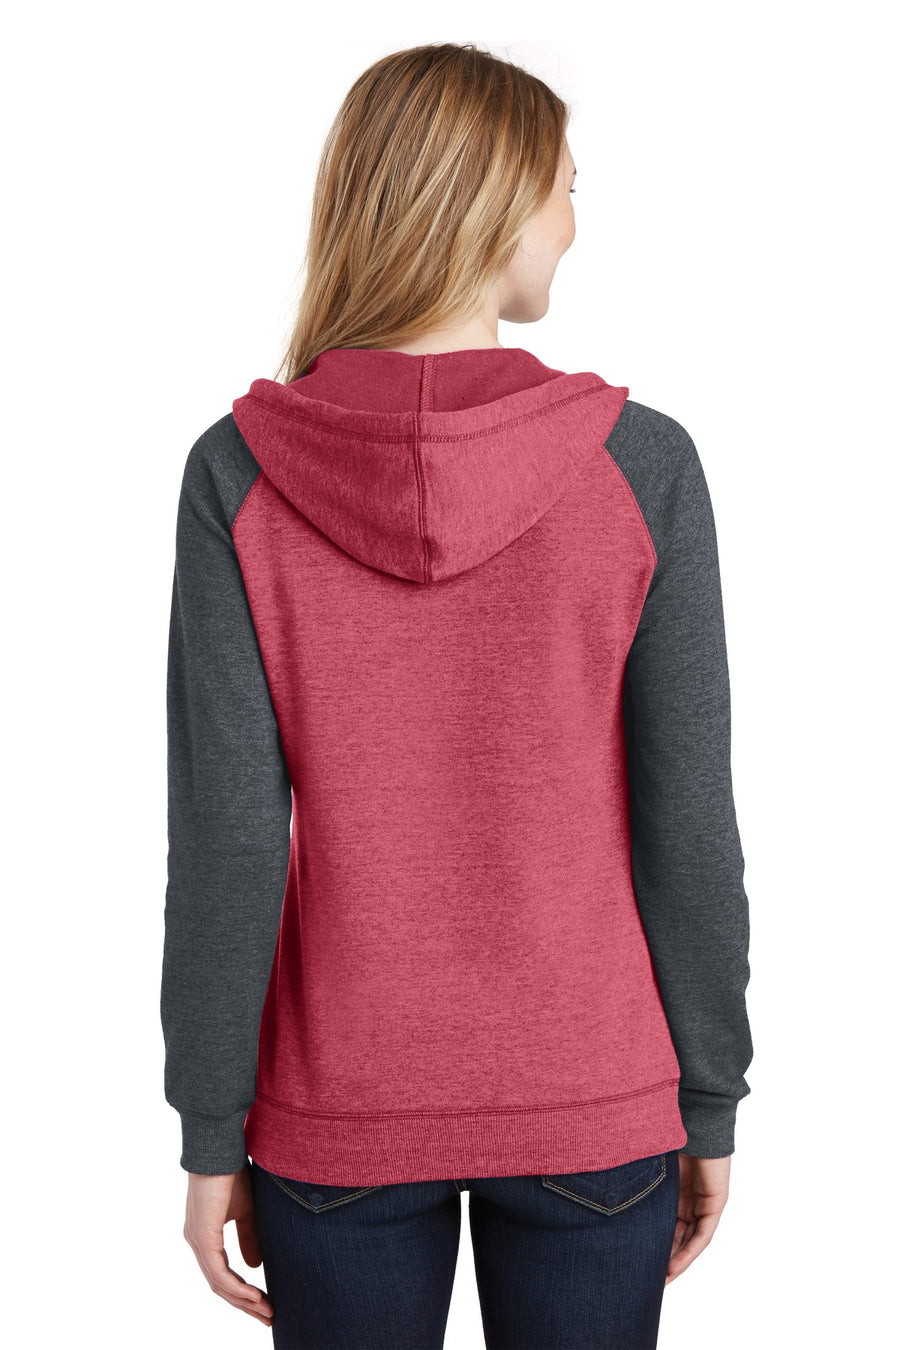 DT296-Heathered Red/ Heathered Charcoal-back_model